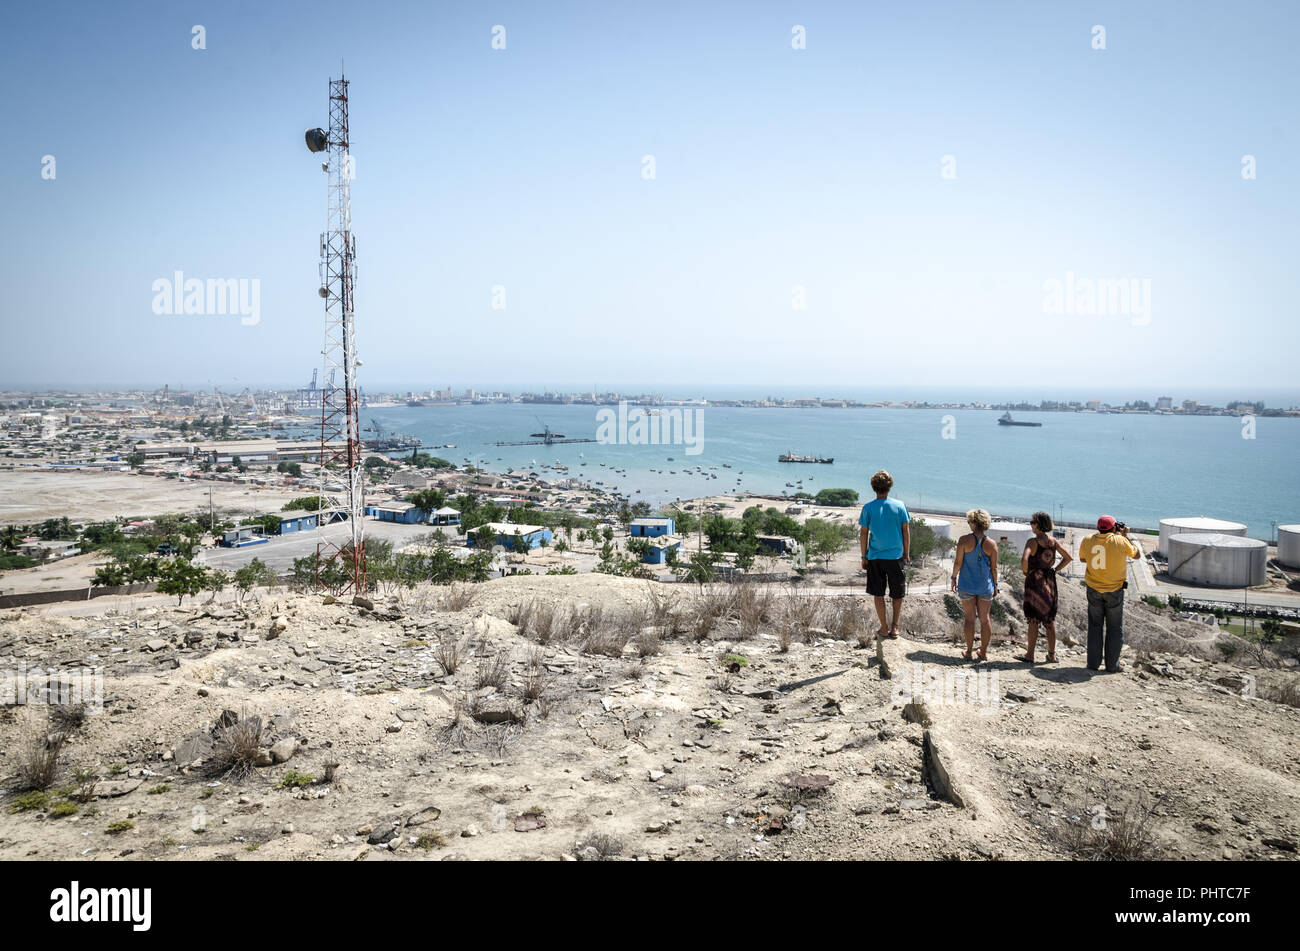 Radio antenna with the Atlantic ocean and people looking in distance, Lobito, Angola. Stock Photo